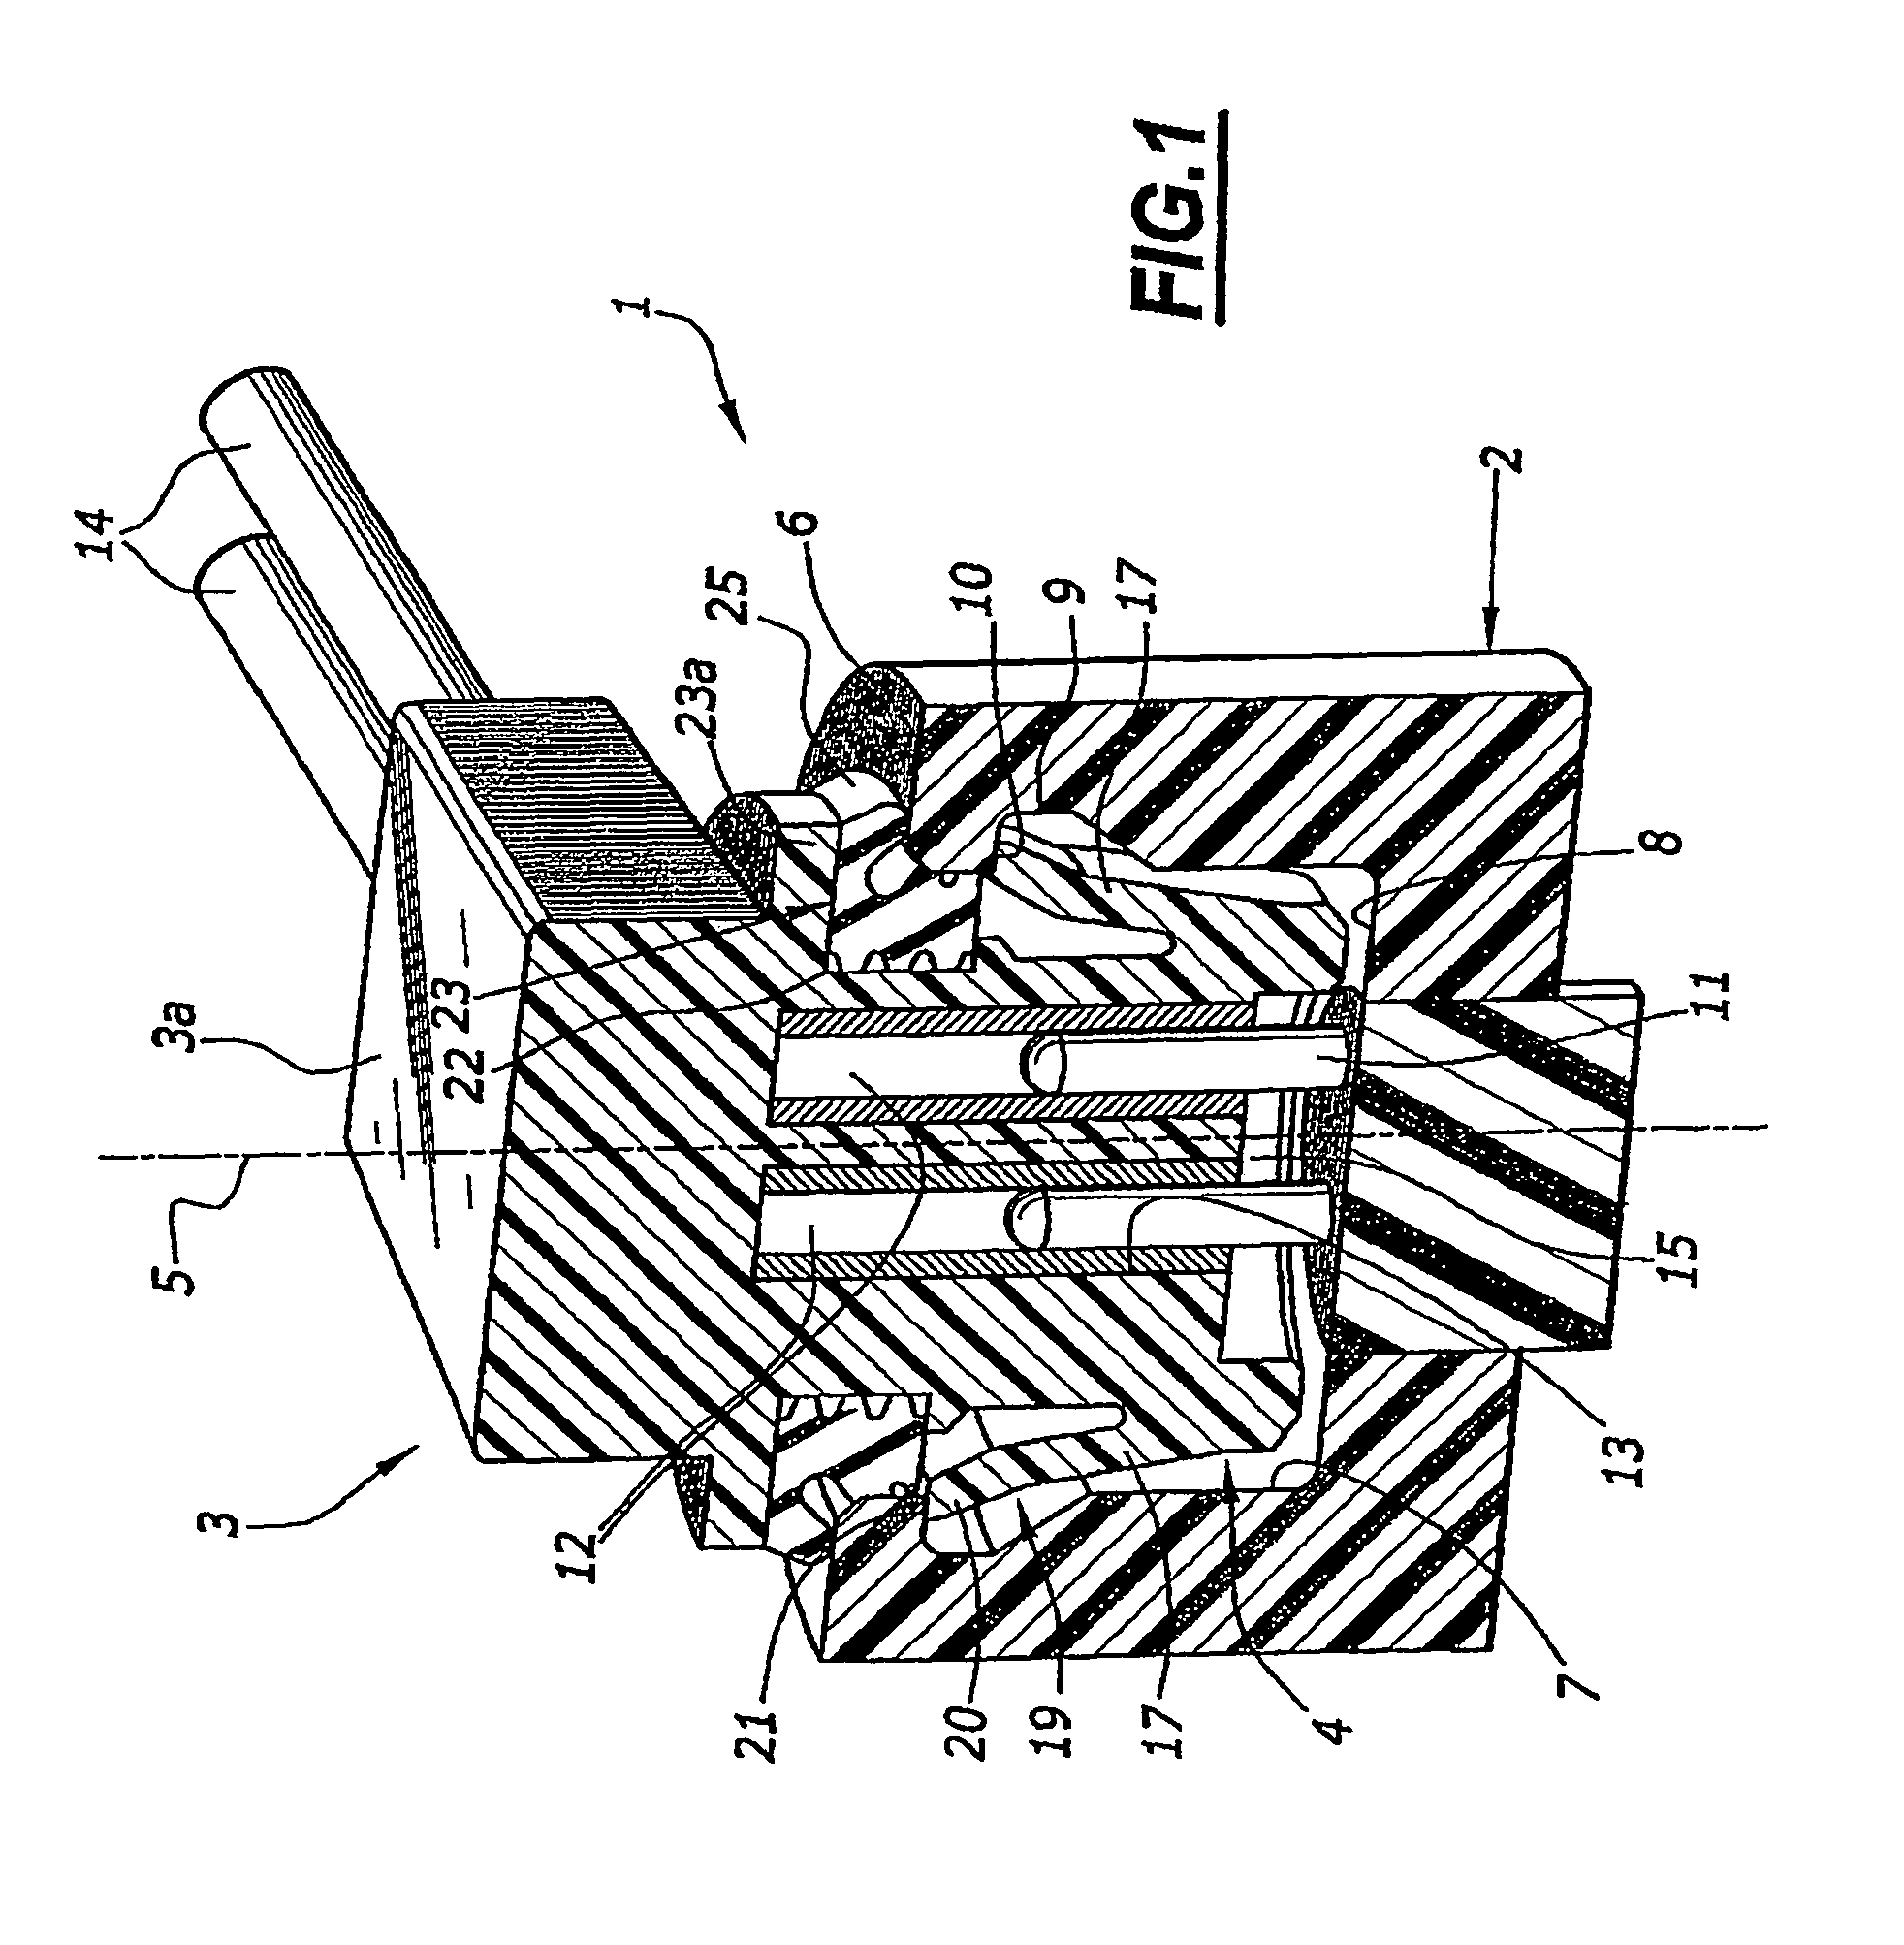 Electrical connector assembly for an airbag ignitor